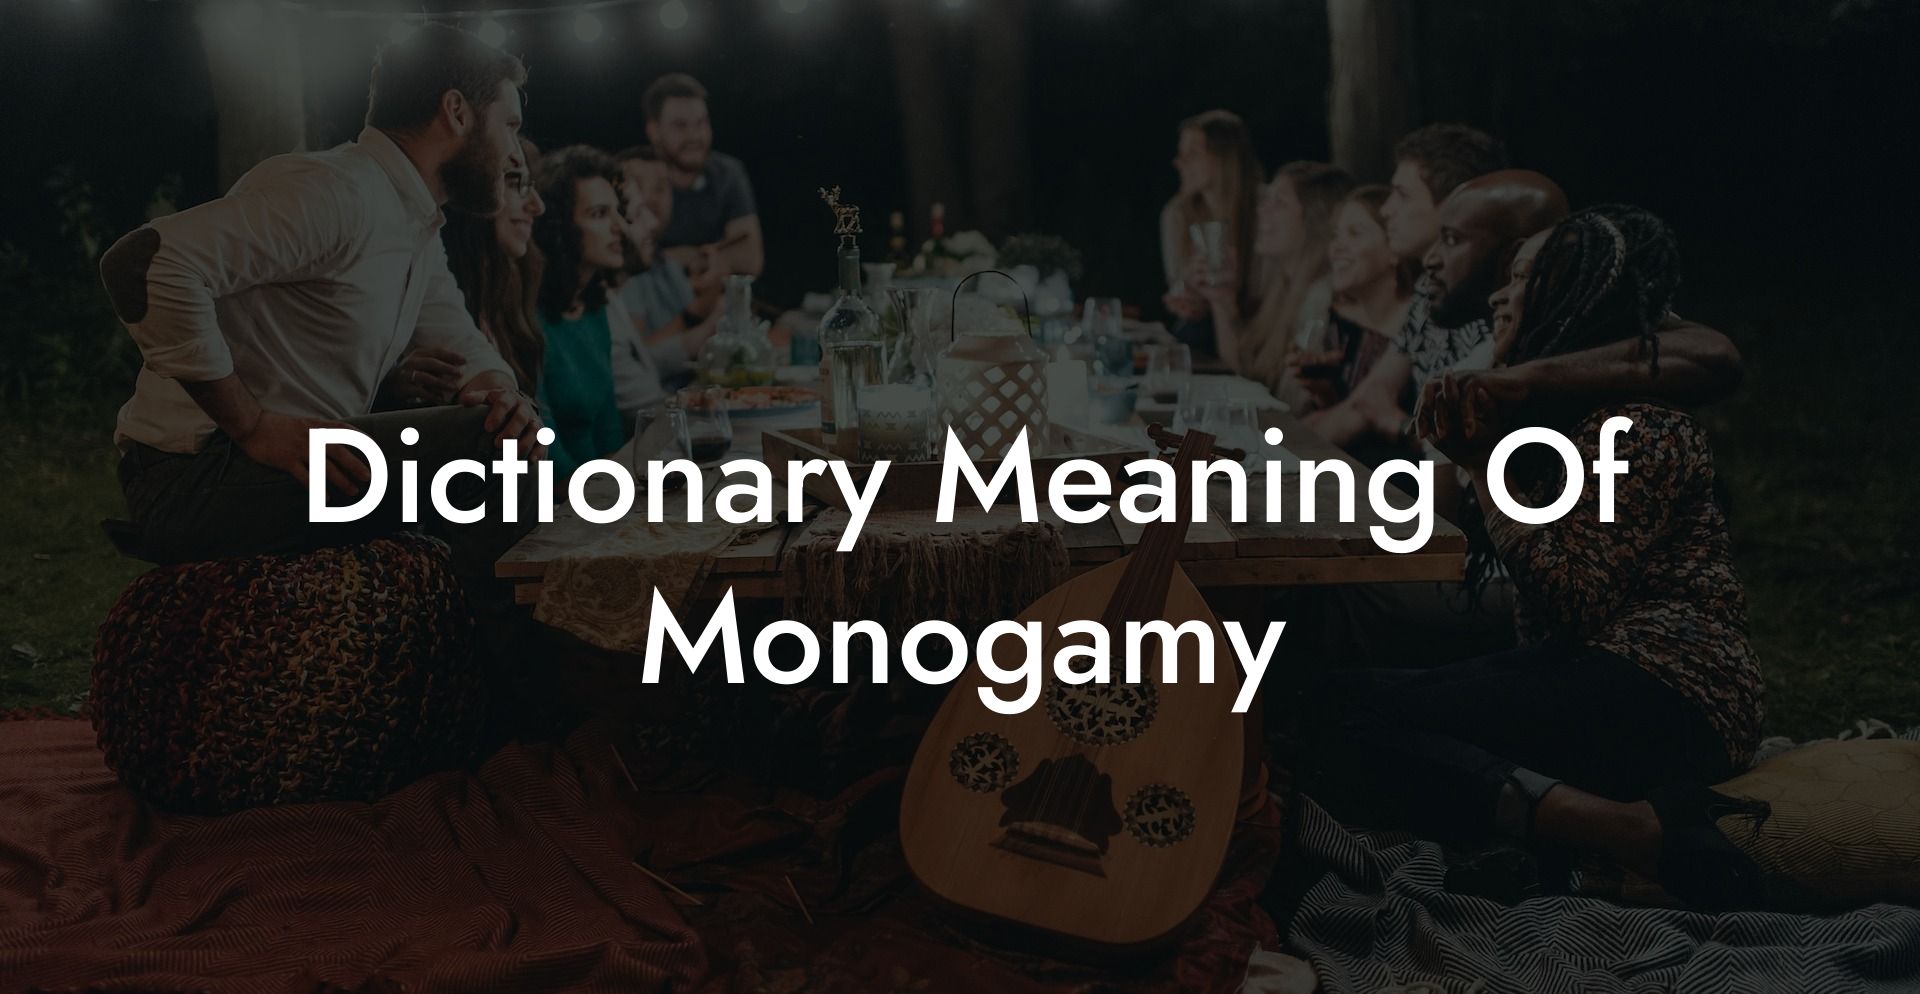 Dictionary Meaning Of Monogamy